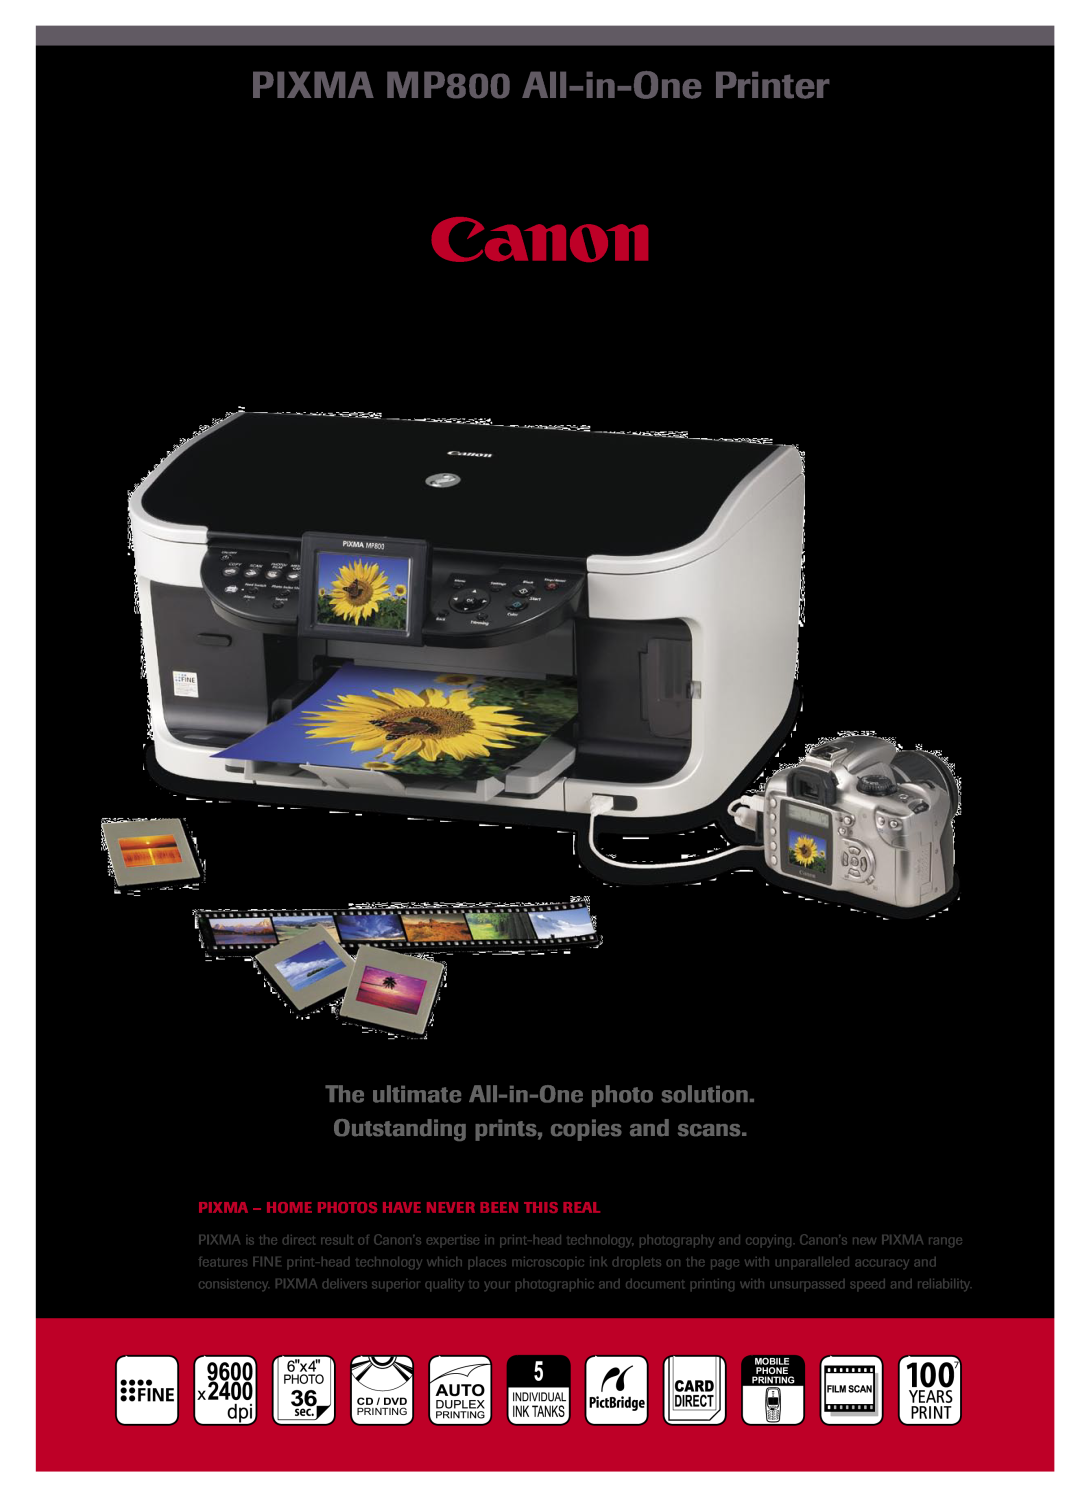 Canon MP800 manual The ultimate All-in-One photo solution, Outstanding prints, copies and scans 